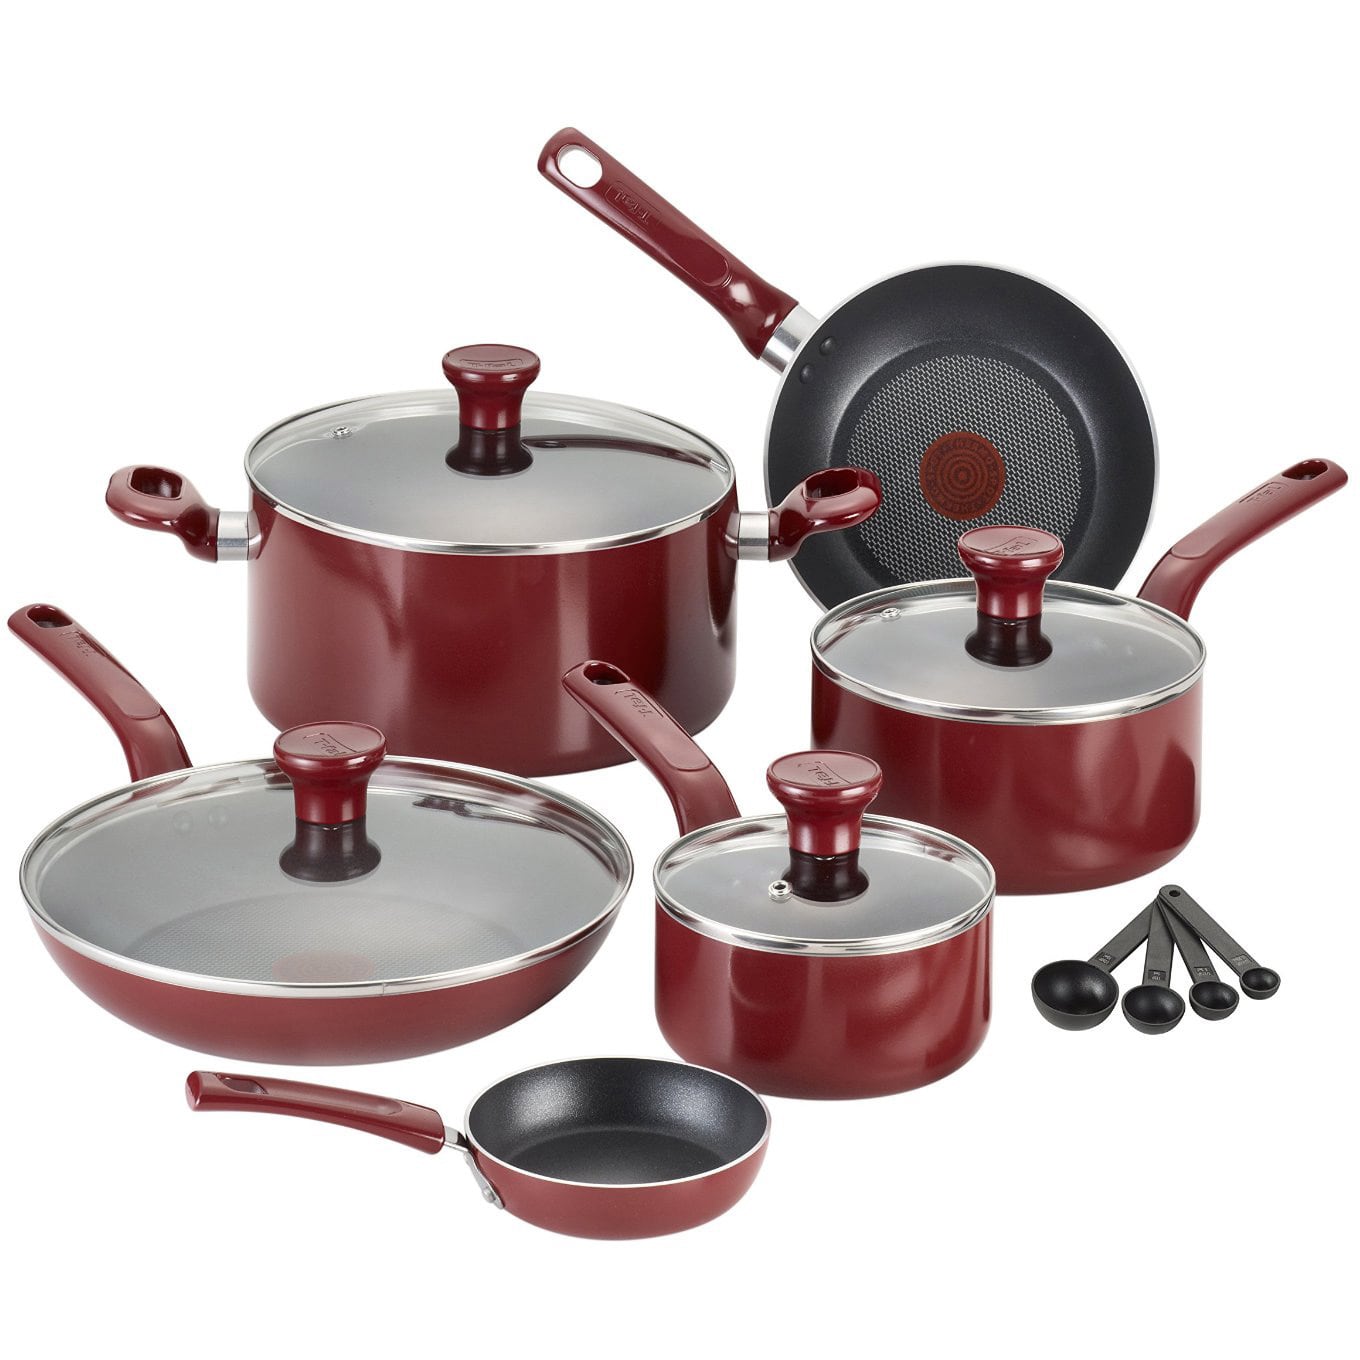 T-Fal Excite 14 Piece Nonstick Cookware Set - image 2 of 5